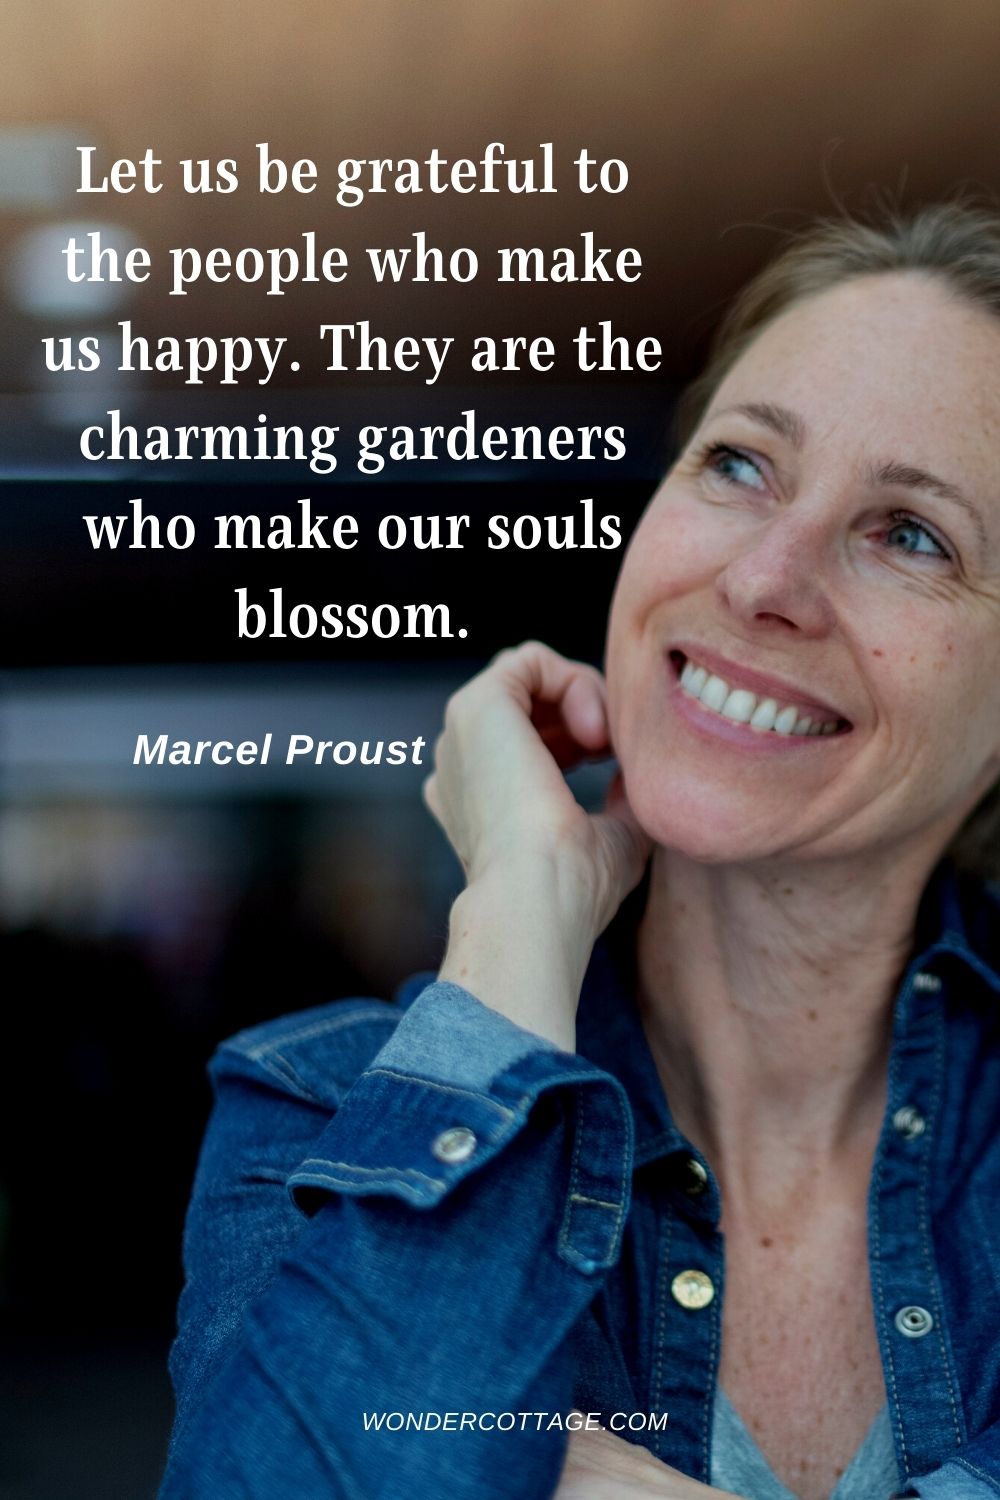 Let us be grateful to the people who make us happy. They are the charming gardeners who make our souls blossom. Marcel Proust